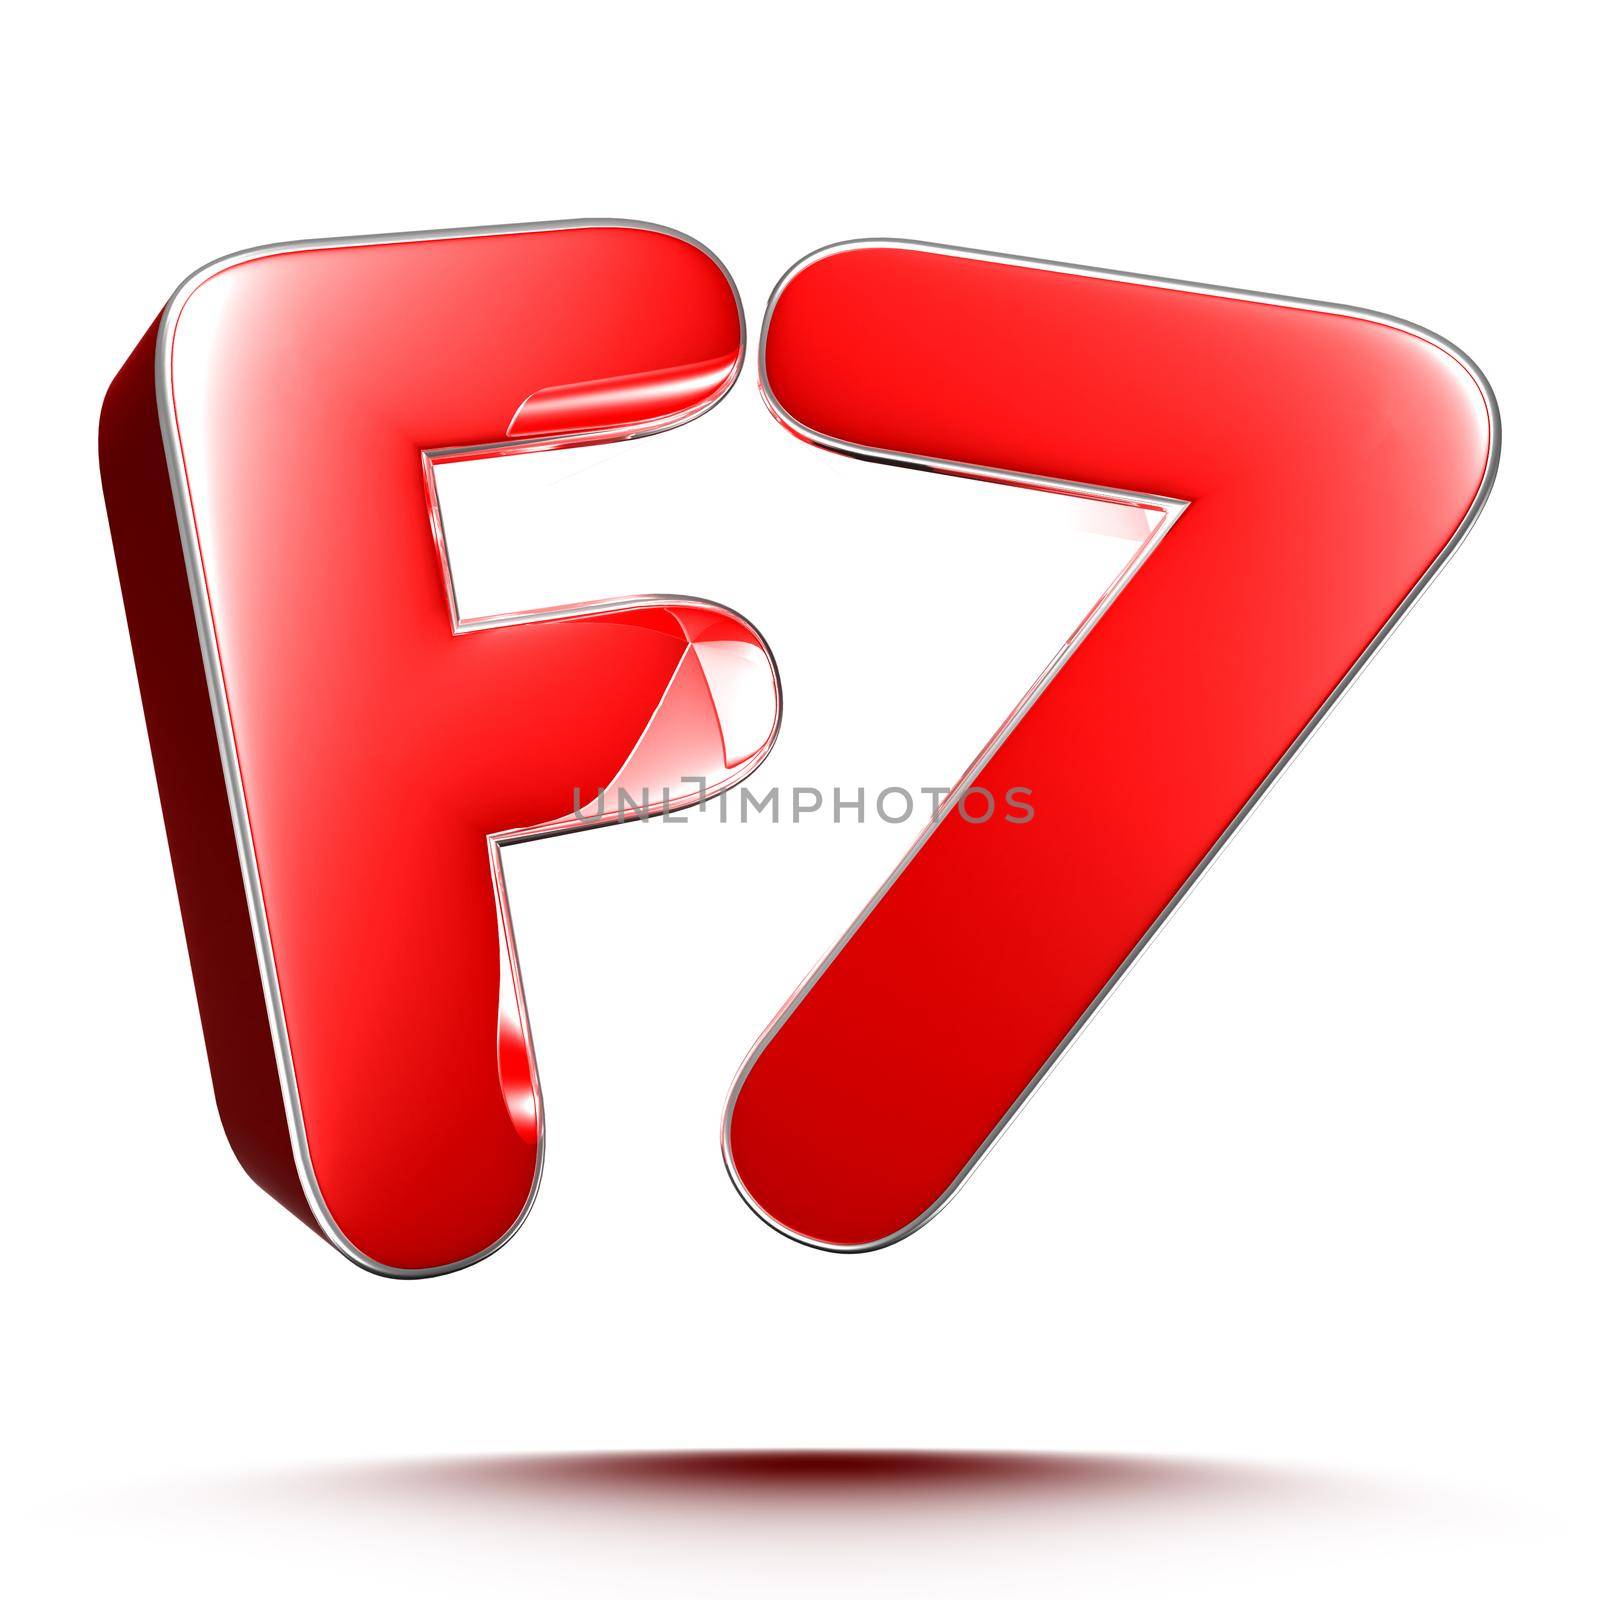 F7 red 3D illustration on white background with clipping path.